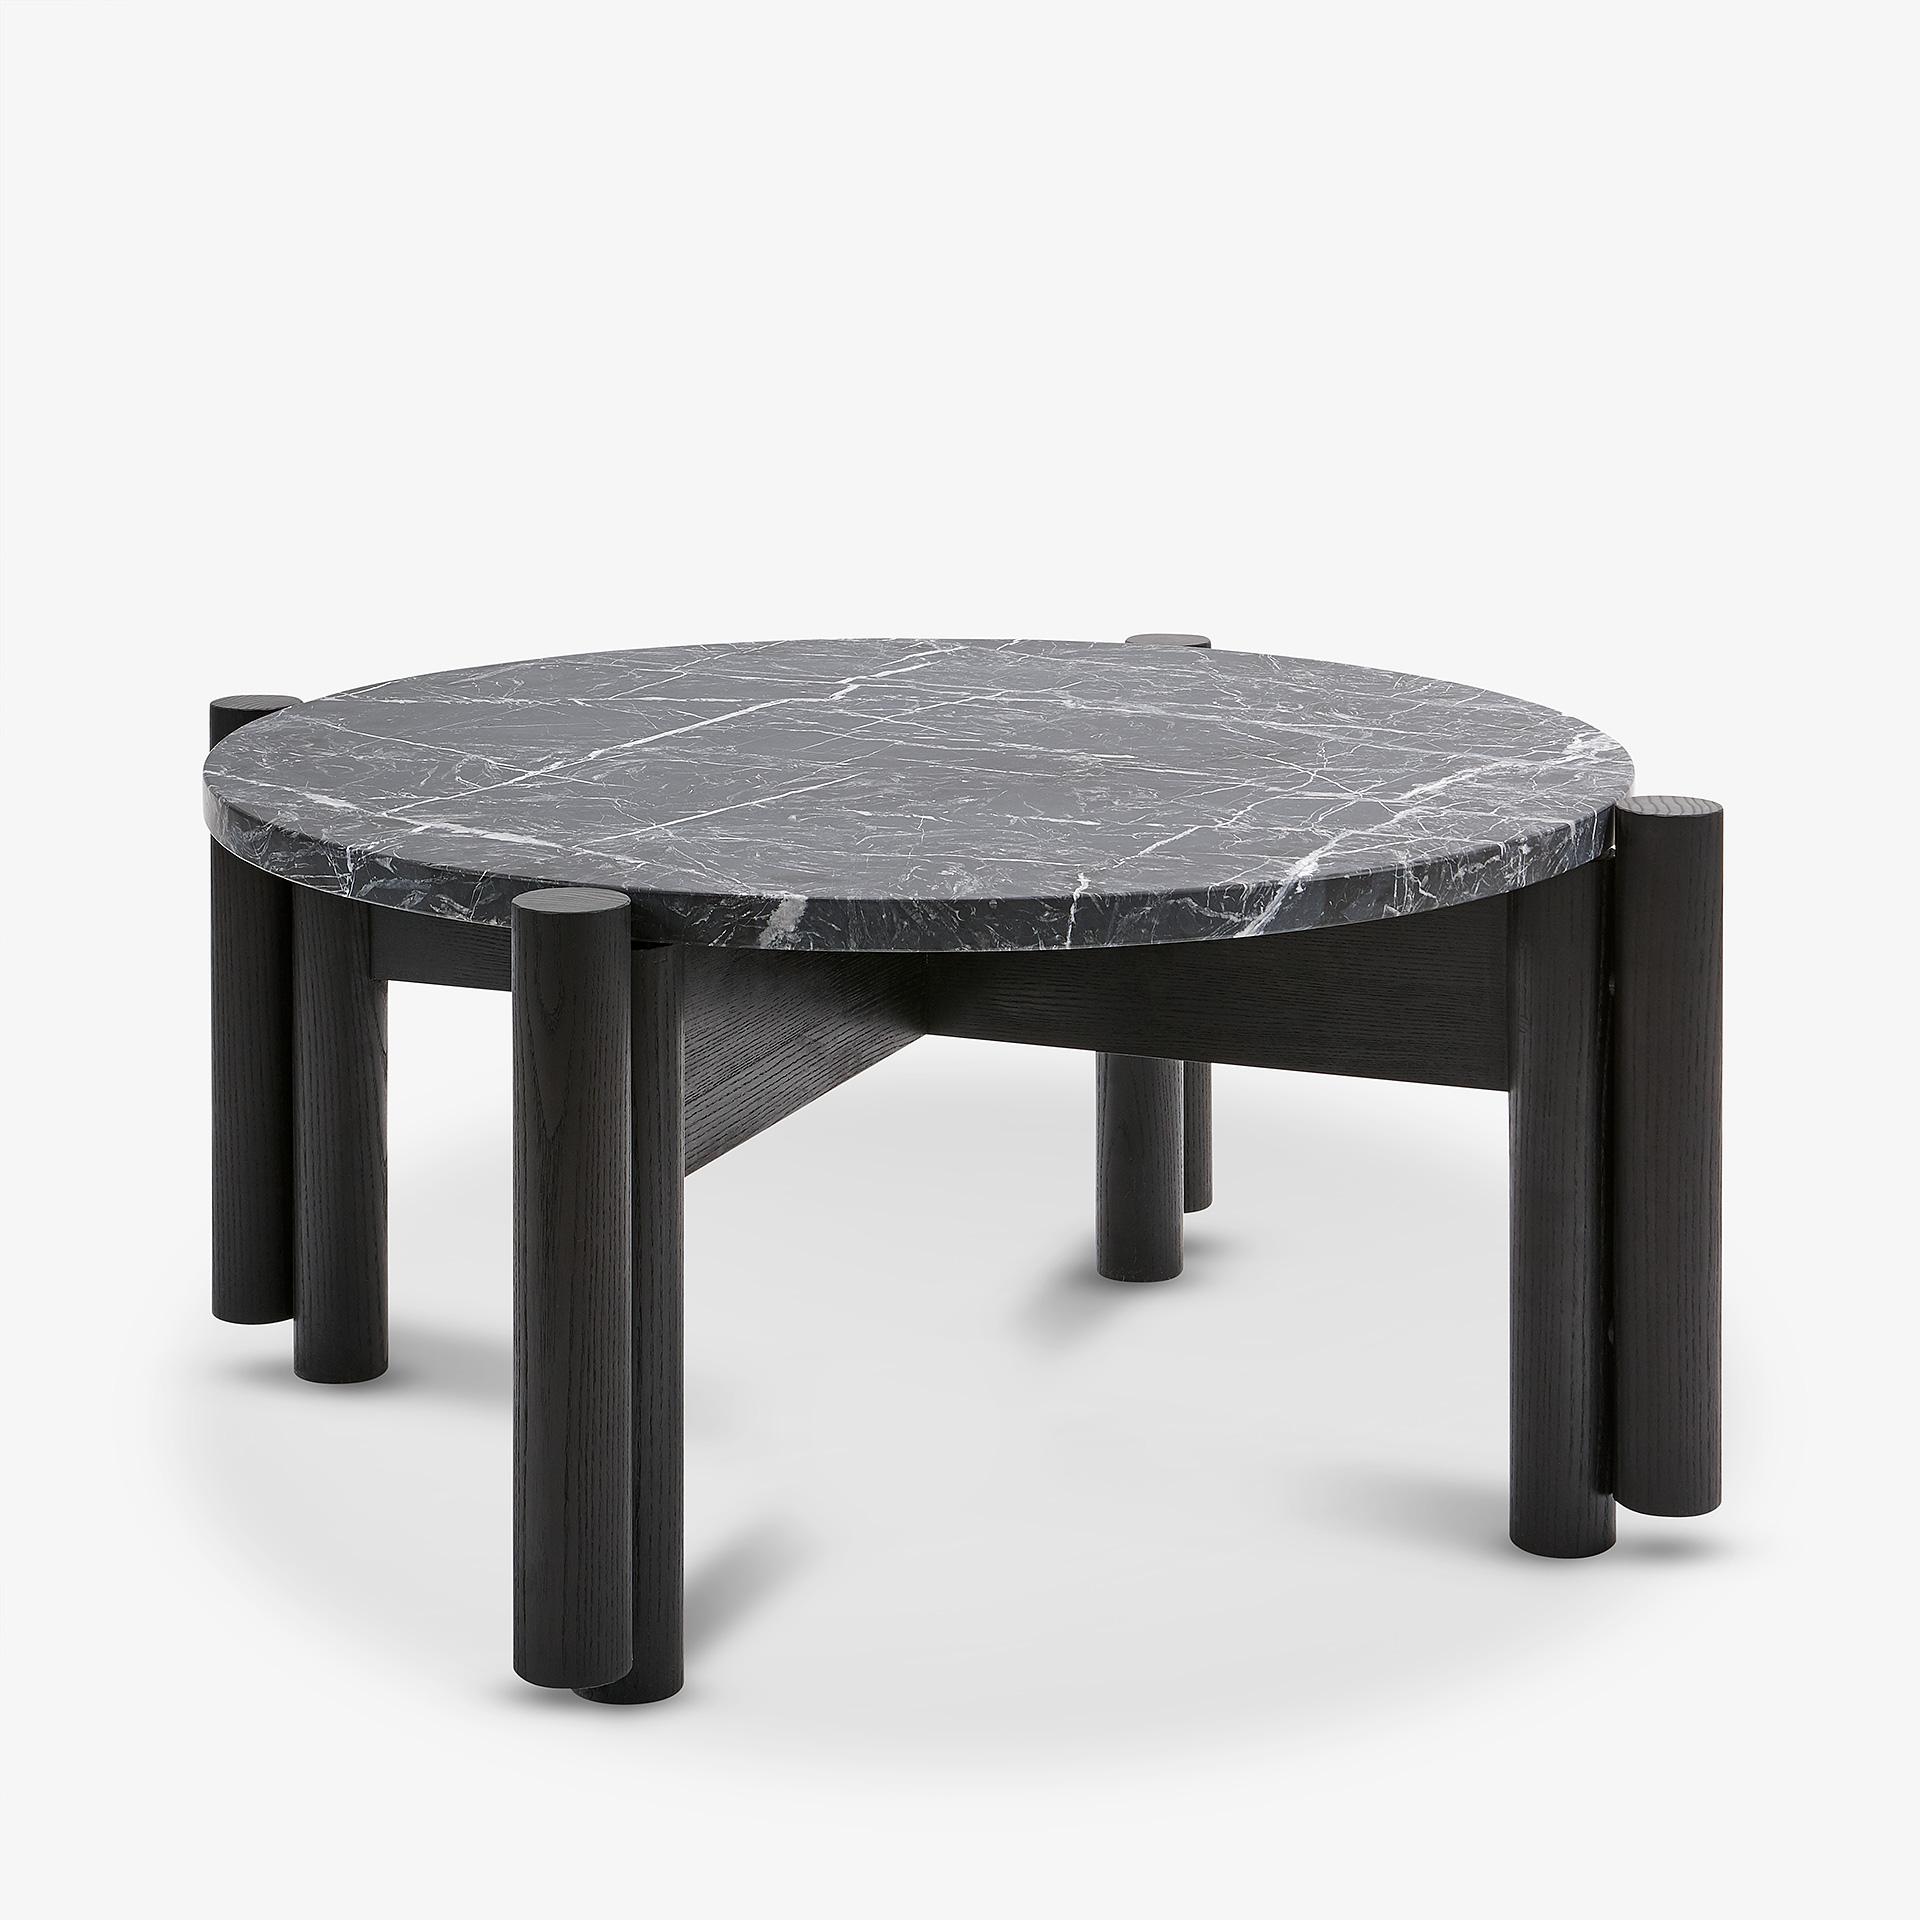 The Paso Fino coffee table by Danny Rosa has been designed exclusively for Studio 6F. Shown in Blackened Ash and Nero Marquina marble. 

This piece is also completely customizable and can be made with an endless array of wood and stone options;